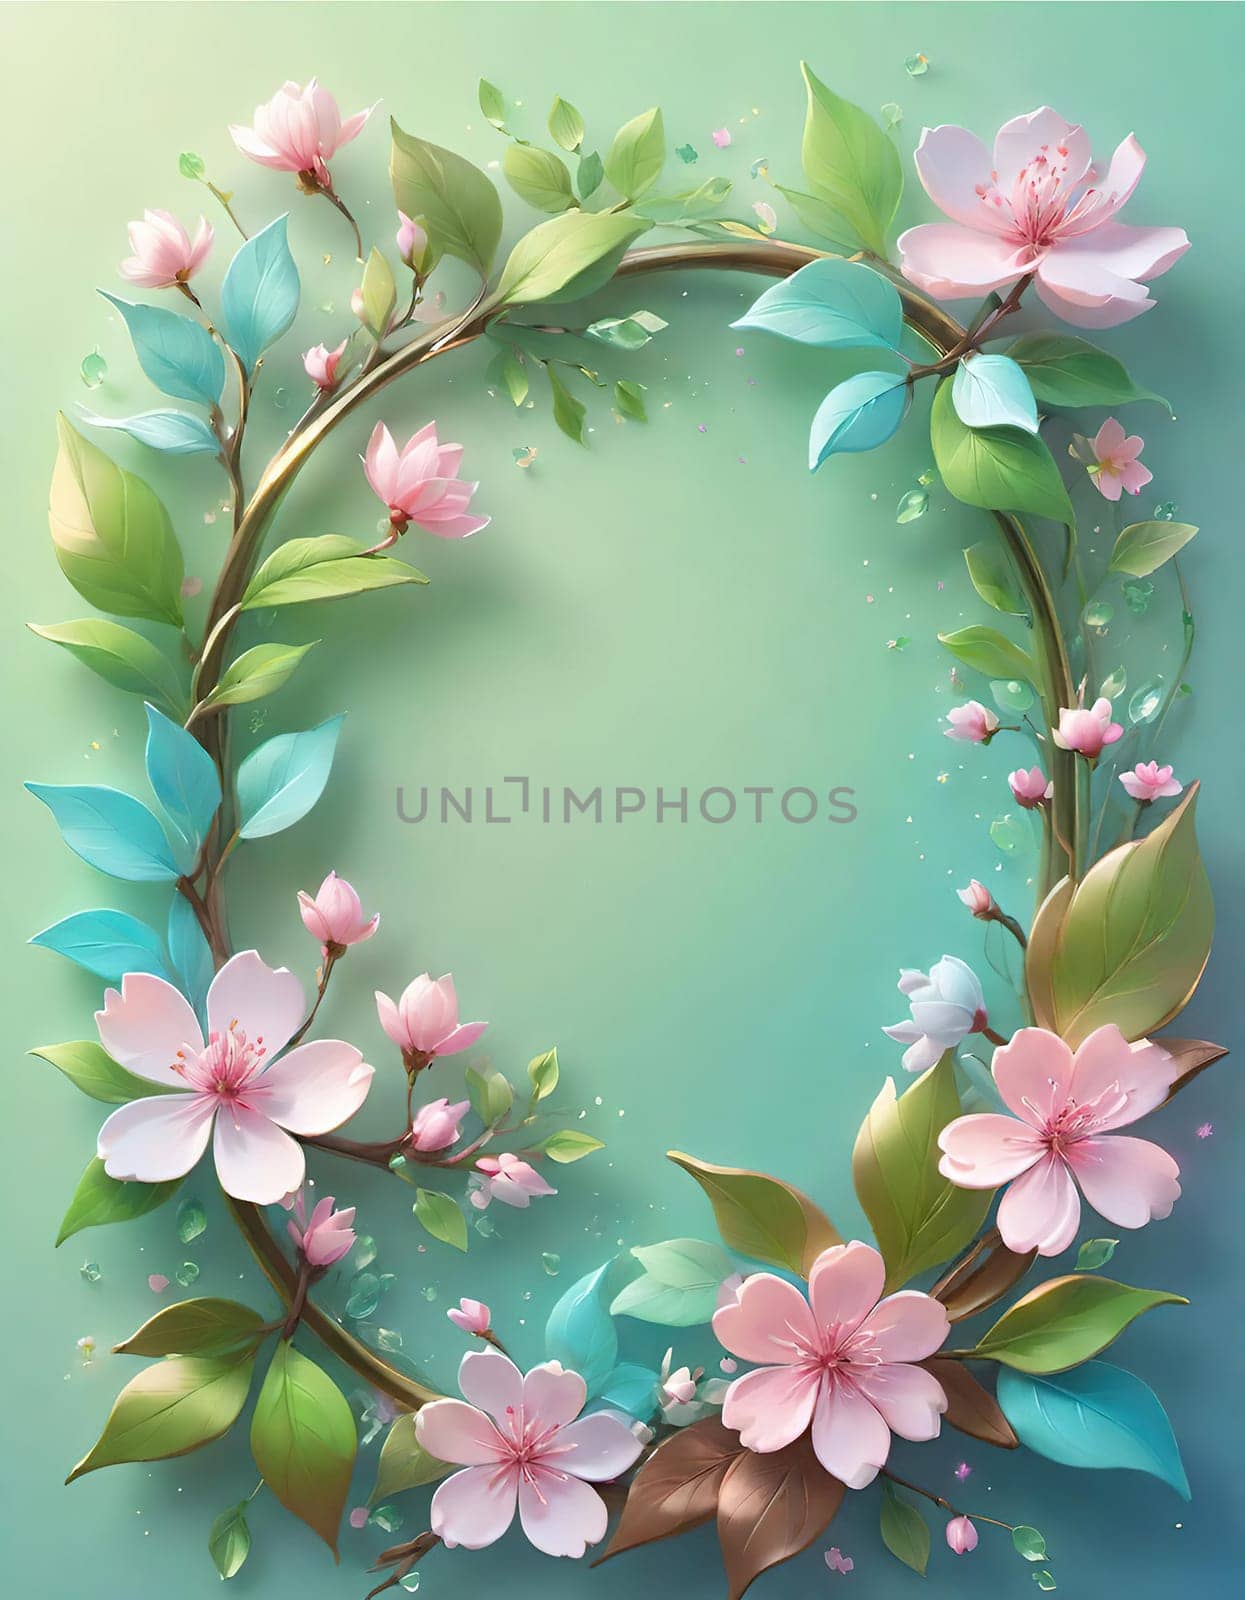 Floral wreath with spring flowers on background. Vector illustration.Spring background with flowers and wreath. Vector illustration for your design.Spring background with cherry blossoms and green leaves. Spring blossom background with copy space for text.